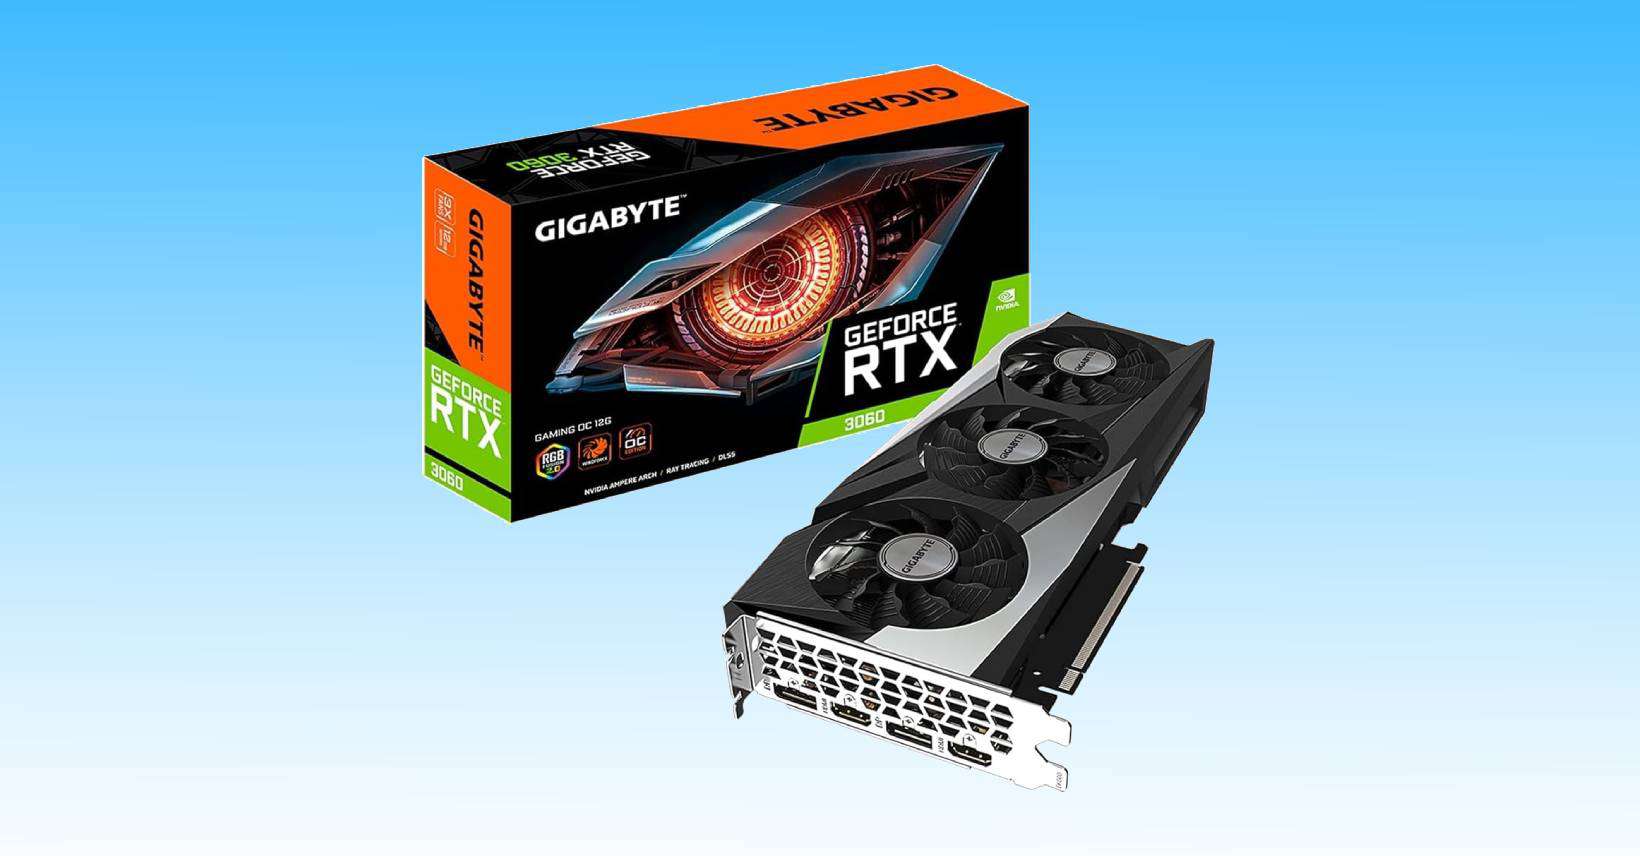 Check out this scintillating Gigabyte RTX 3060 Prime Day graphics